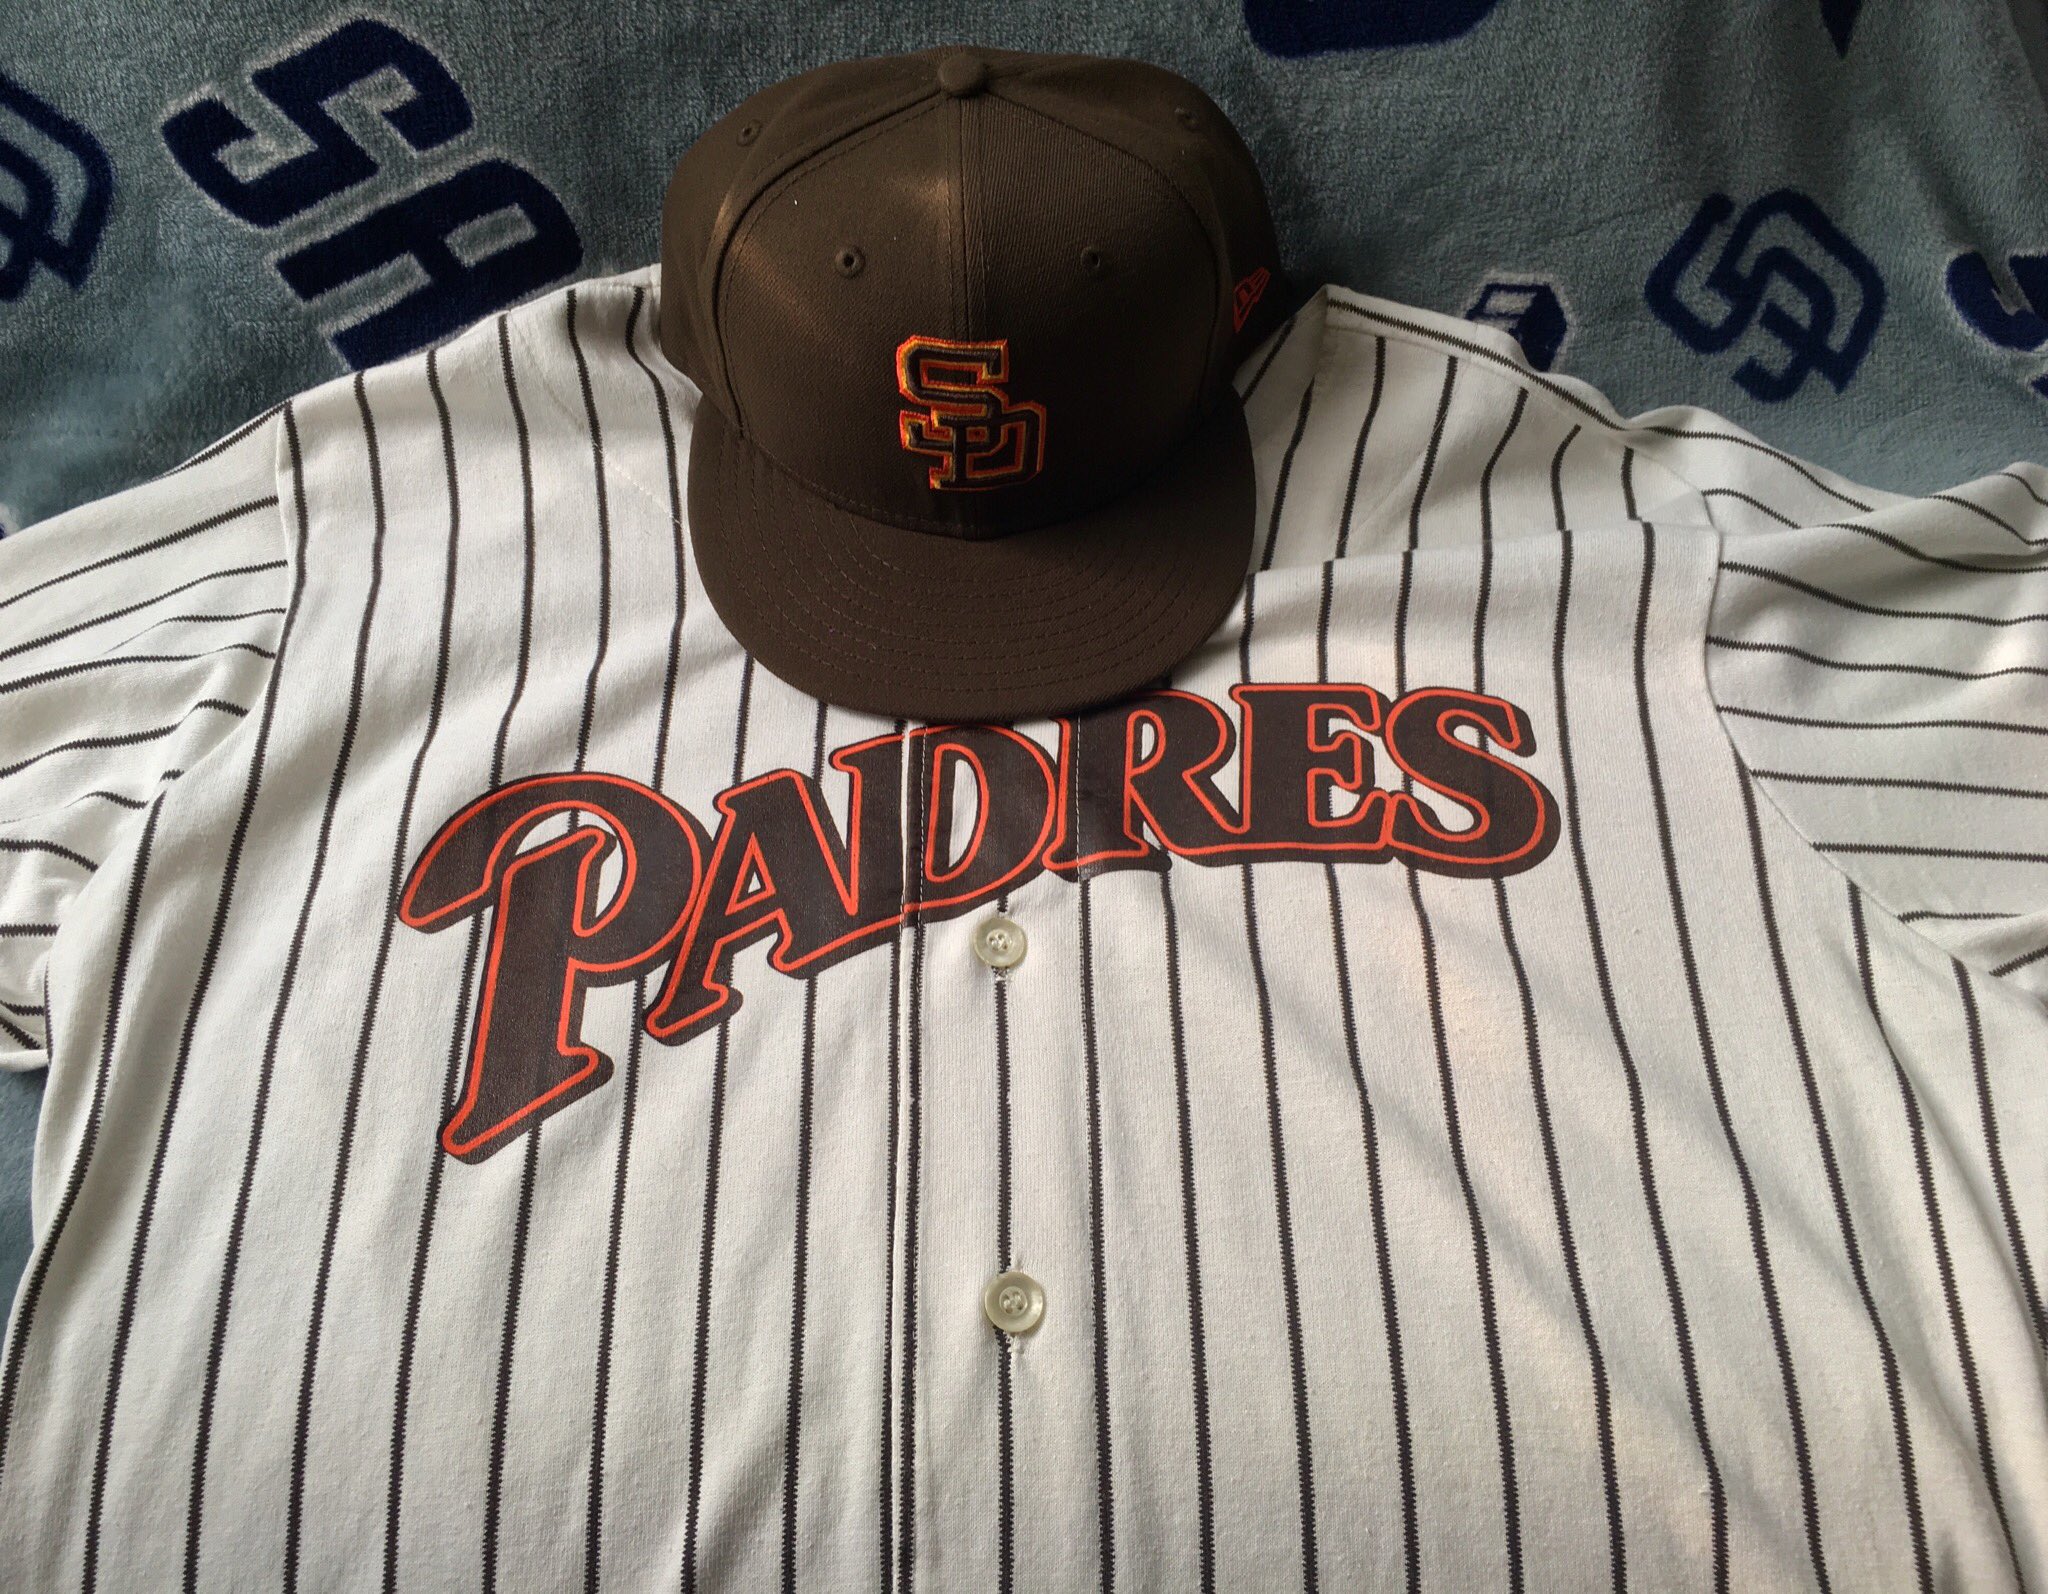 Tim - SD Hat Guy on X: Day 179/365 It's #PadresJersday and @Padres 80s  night tomorrow night? #365DaysOfPadres is in! Today's jersey selection is  the classic 80s pinstripe home jersey paired with